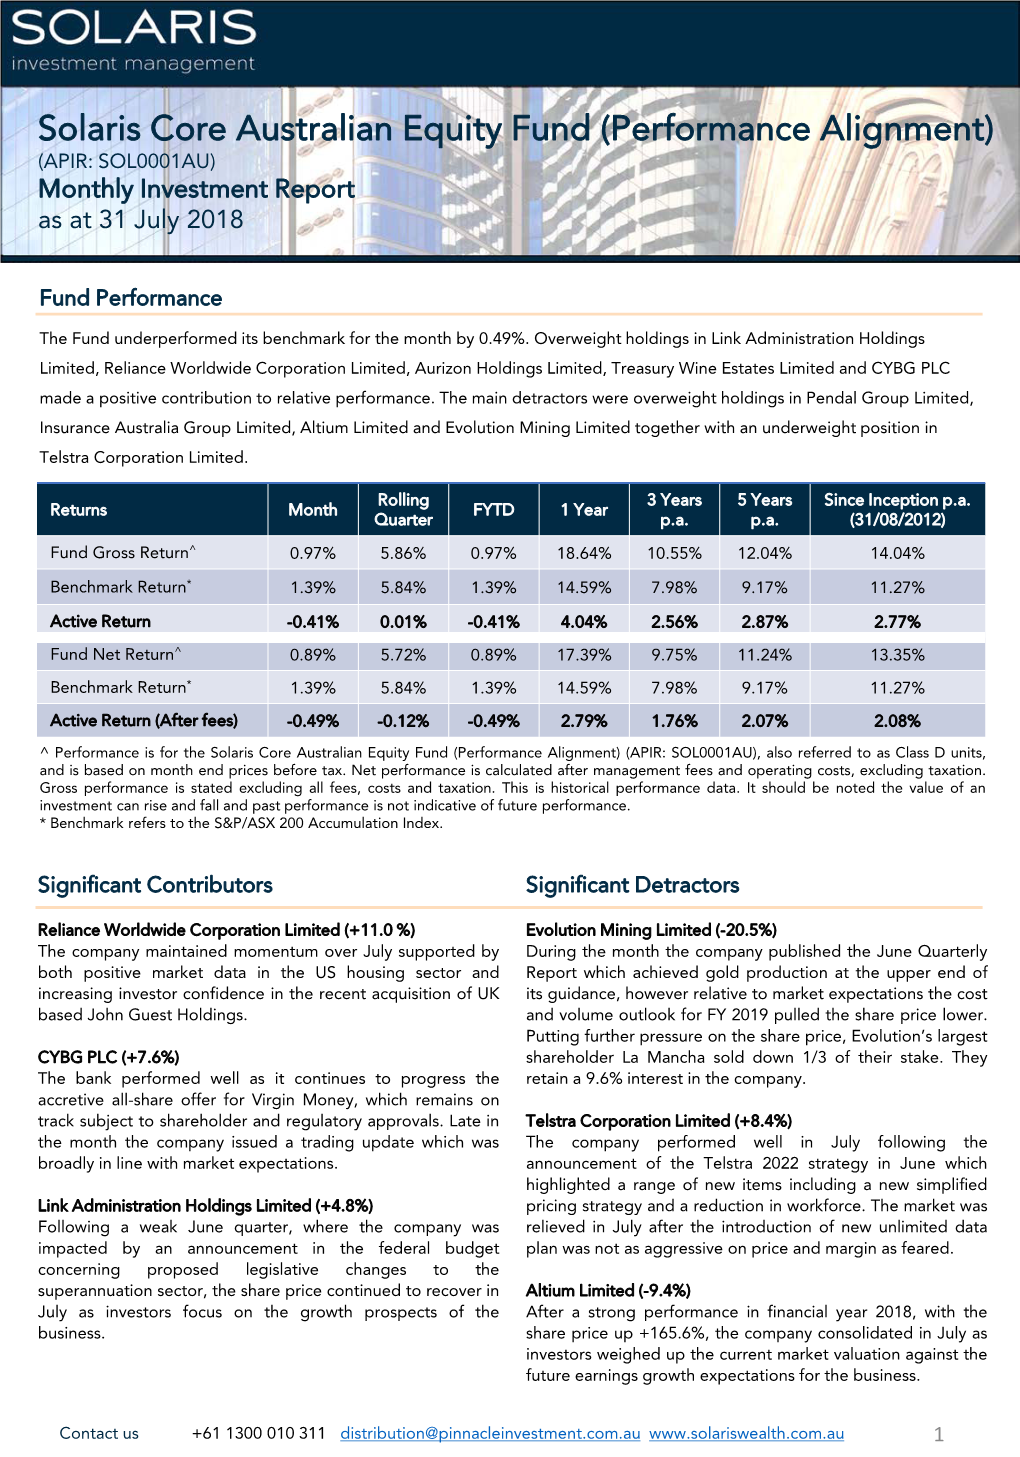 Solaris Core Australian Equity Fund (Performance Alignment) (APIR: SOL0001AU) Monthly Investment Report As at 31 July 2018